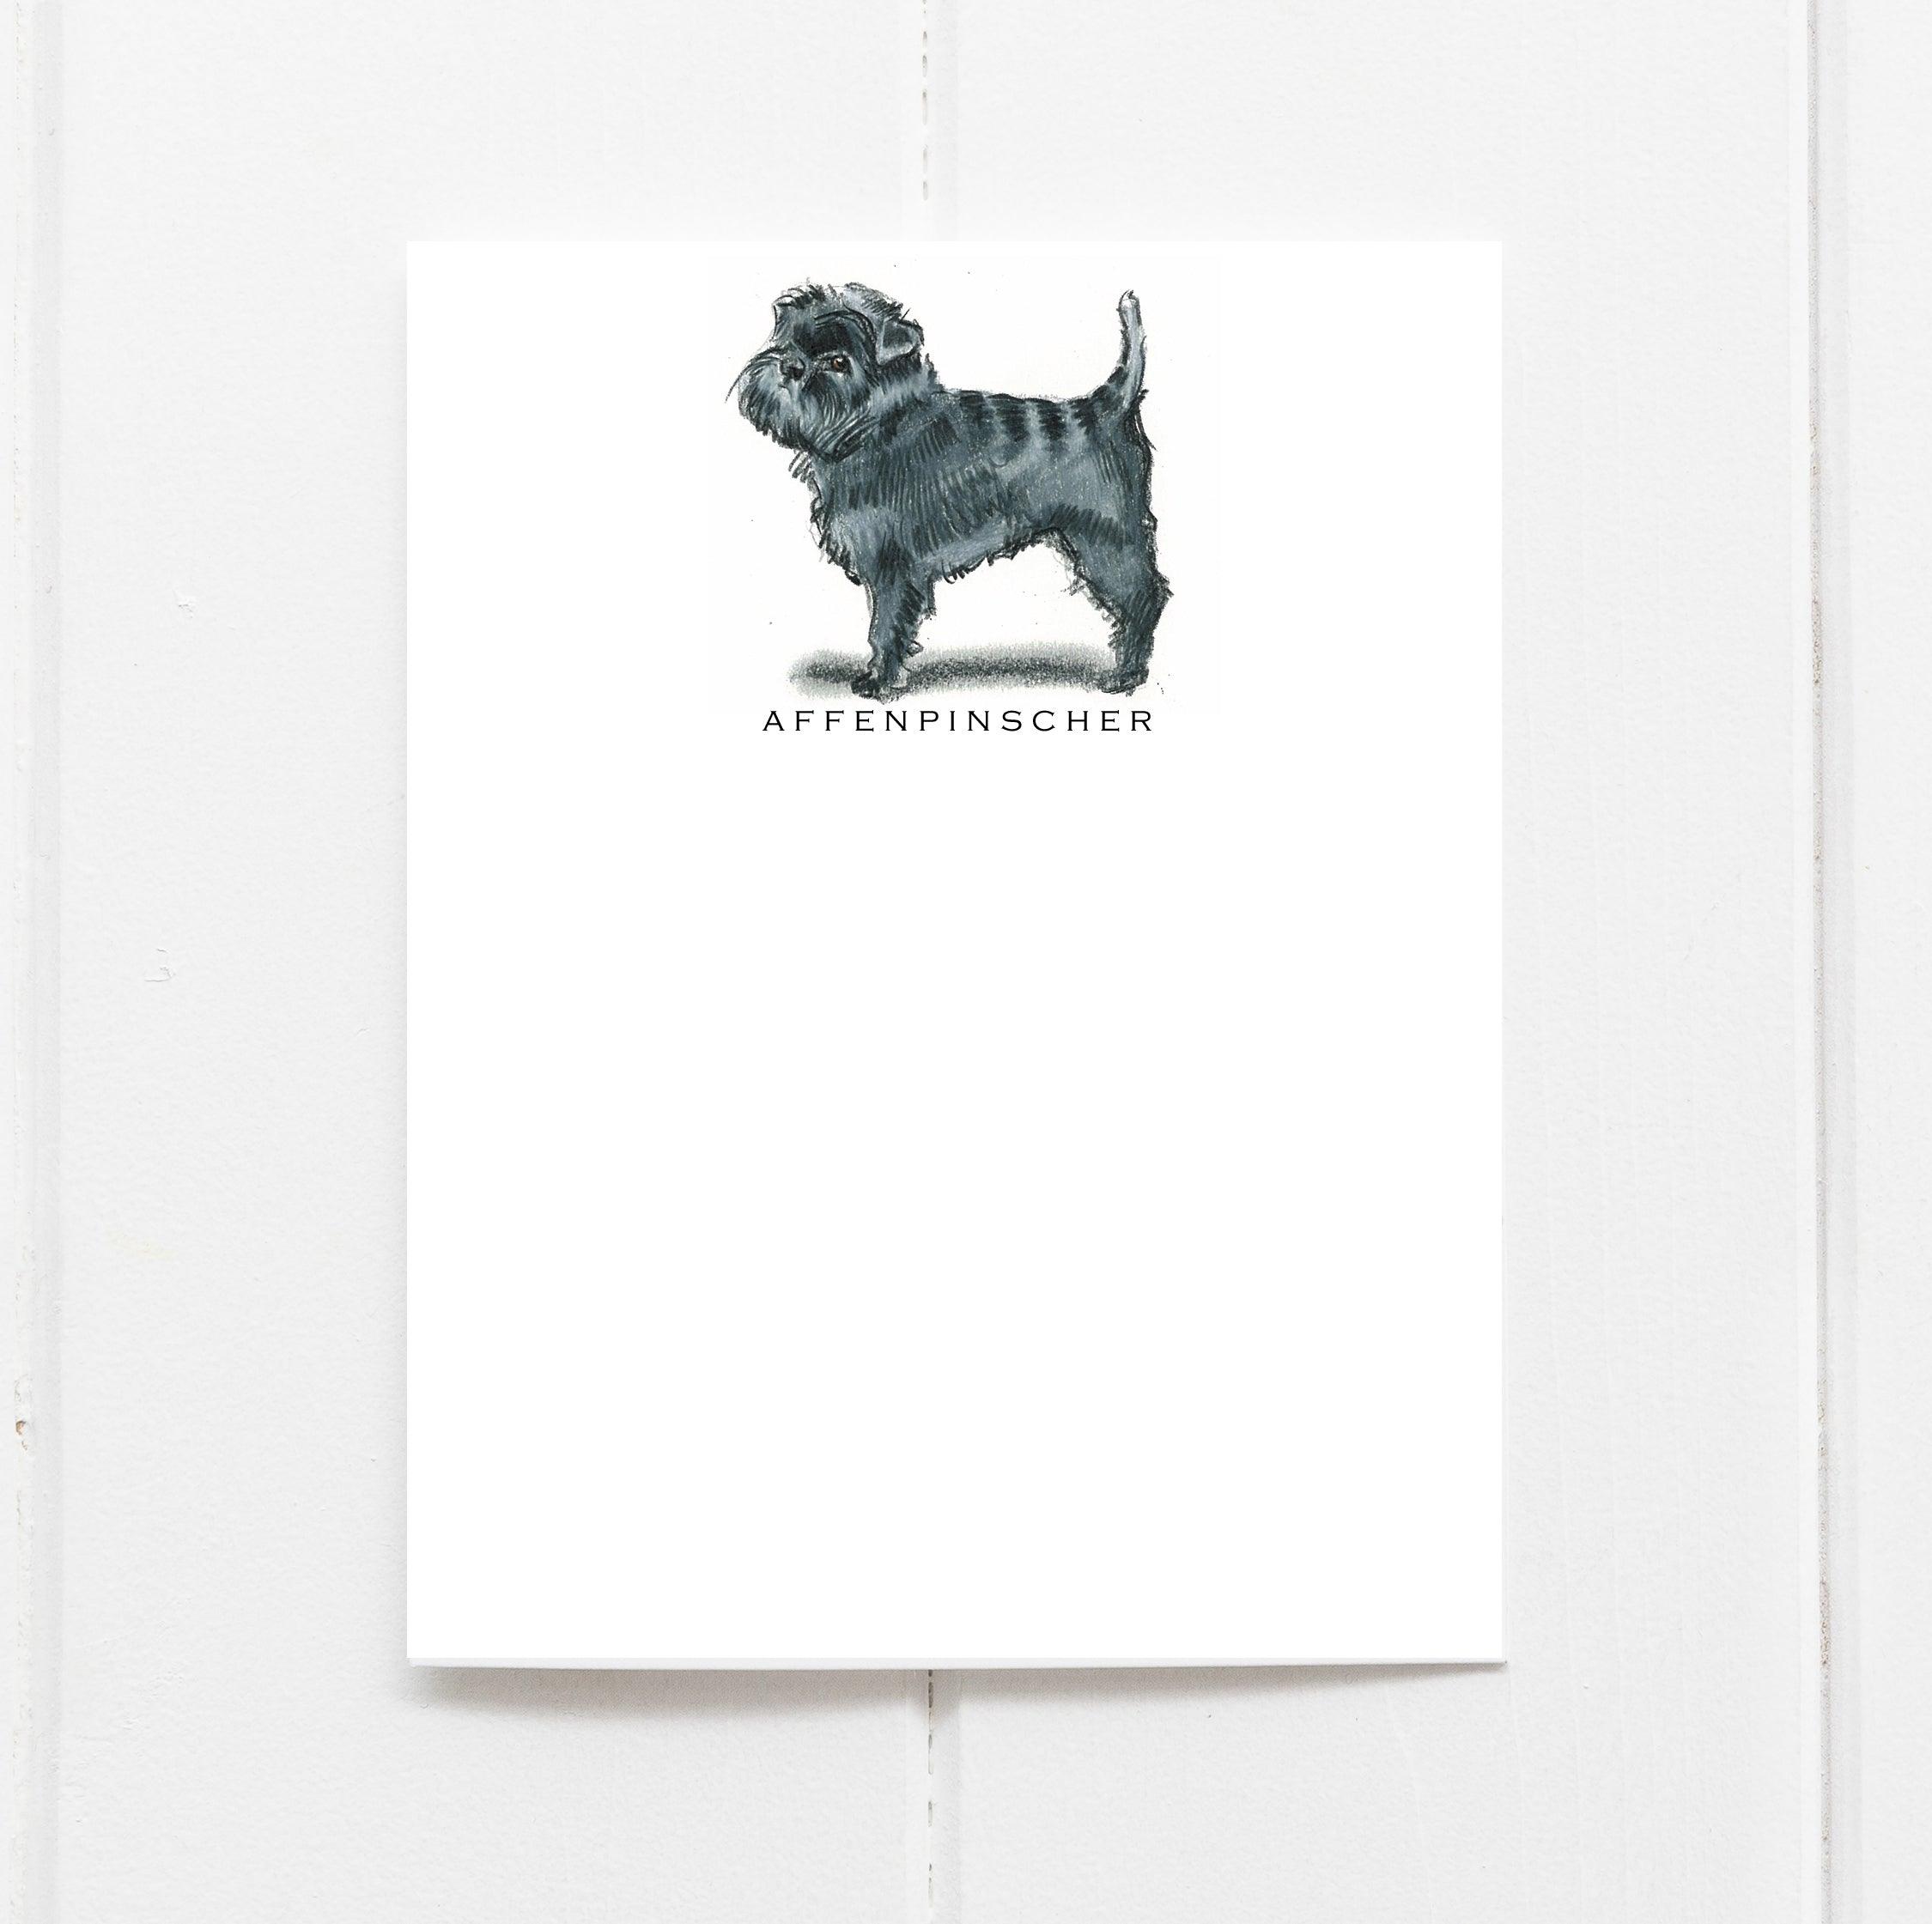 Shih tzu Personalized Stationery Set, Note Cards For Women